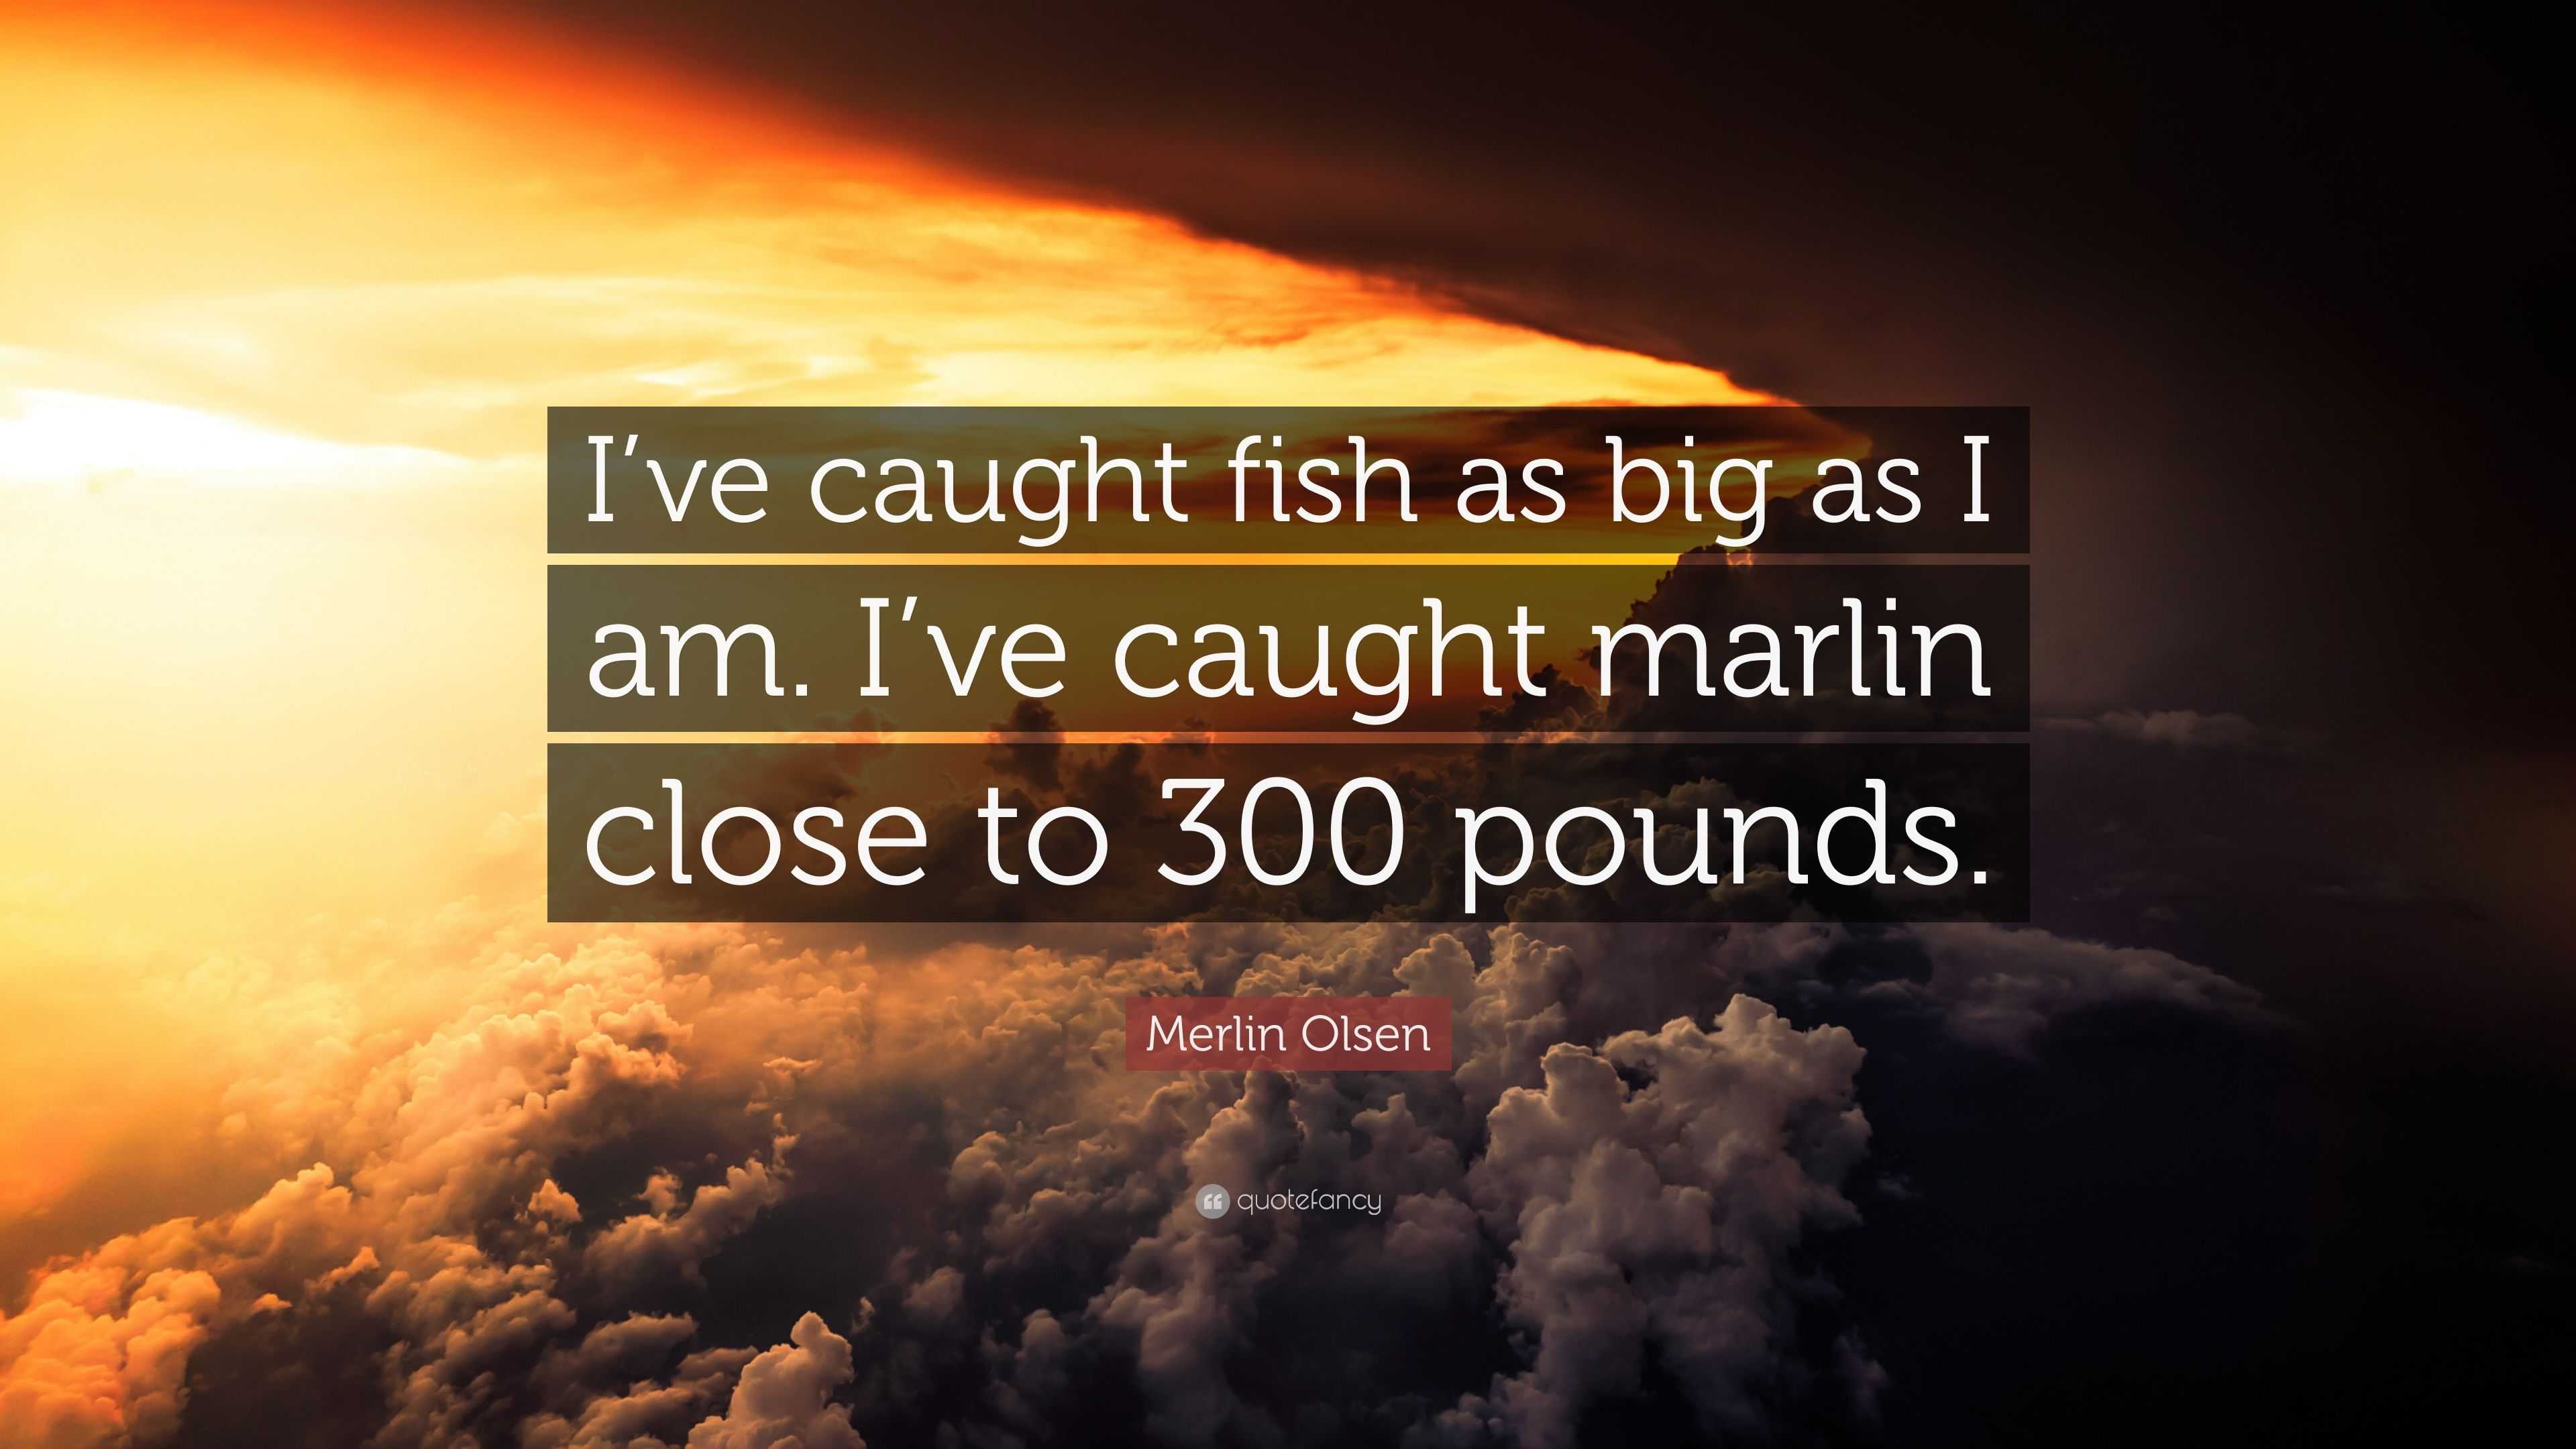 Merlin Olsen Quote: “I've caught fish as big as I am. I've caught